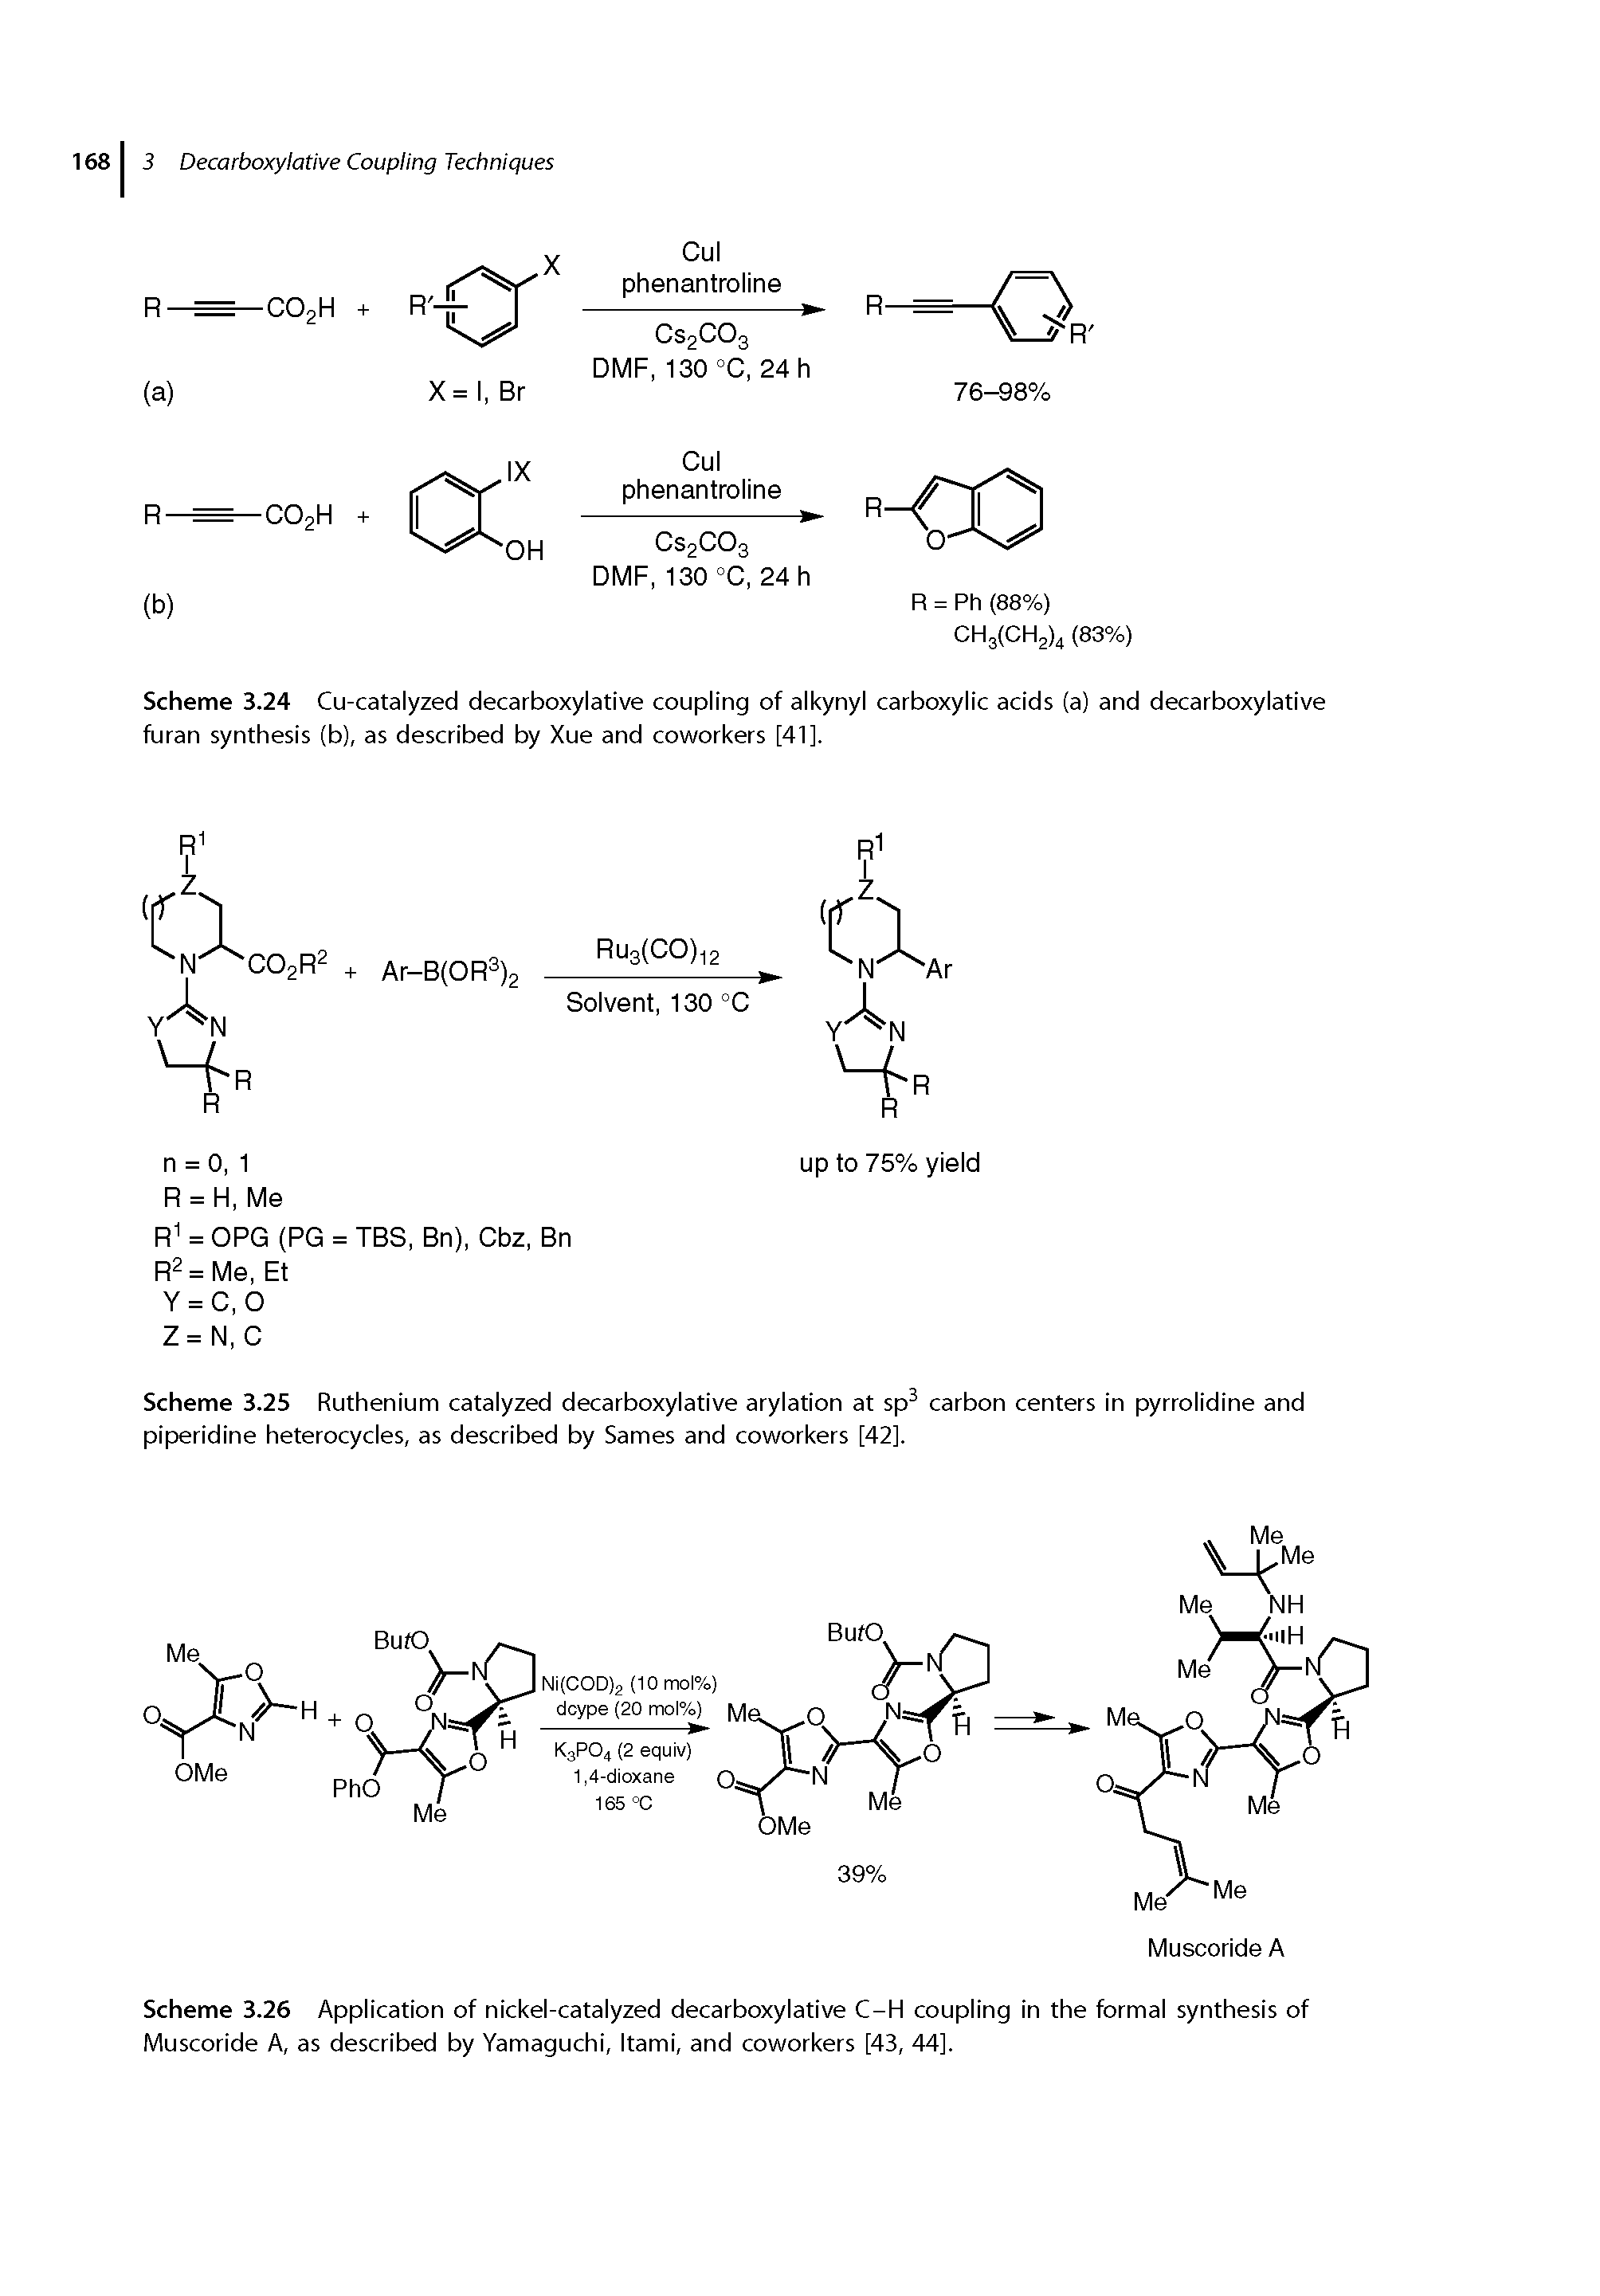 Scheme 3.26 Application of nickel-catalyzed decarboxylative C-H coupling in the formal synthesis of Muscoride A, as described by Yamaguchi, Itami, and coworkers [43, 44].